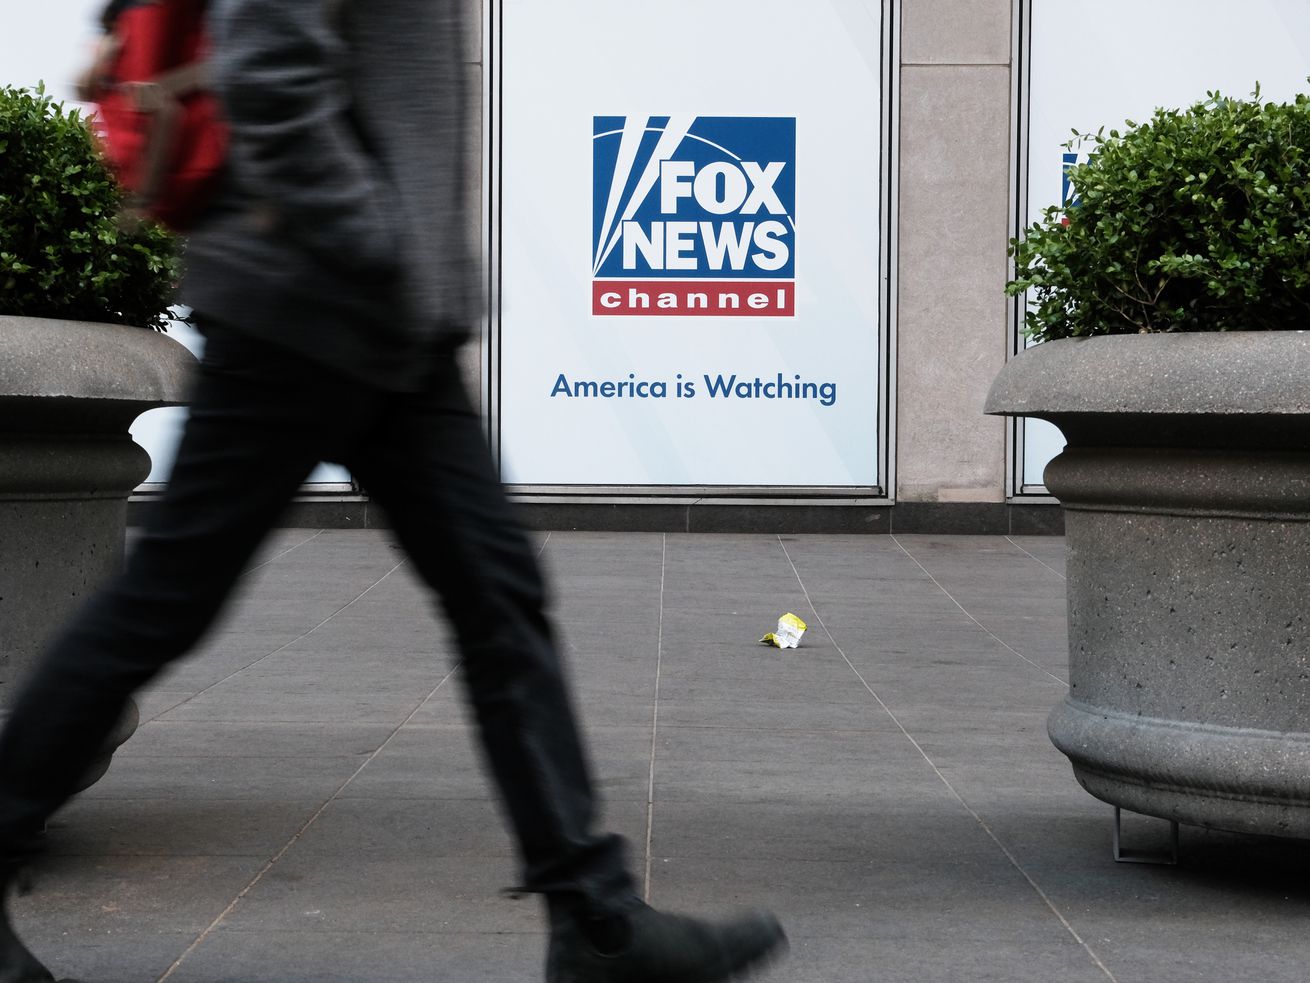 A person walks by the planters outside the News Corp headquarters in New York City, which is displaying a sign that reads “Fox News channel. America is watching.”